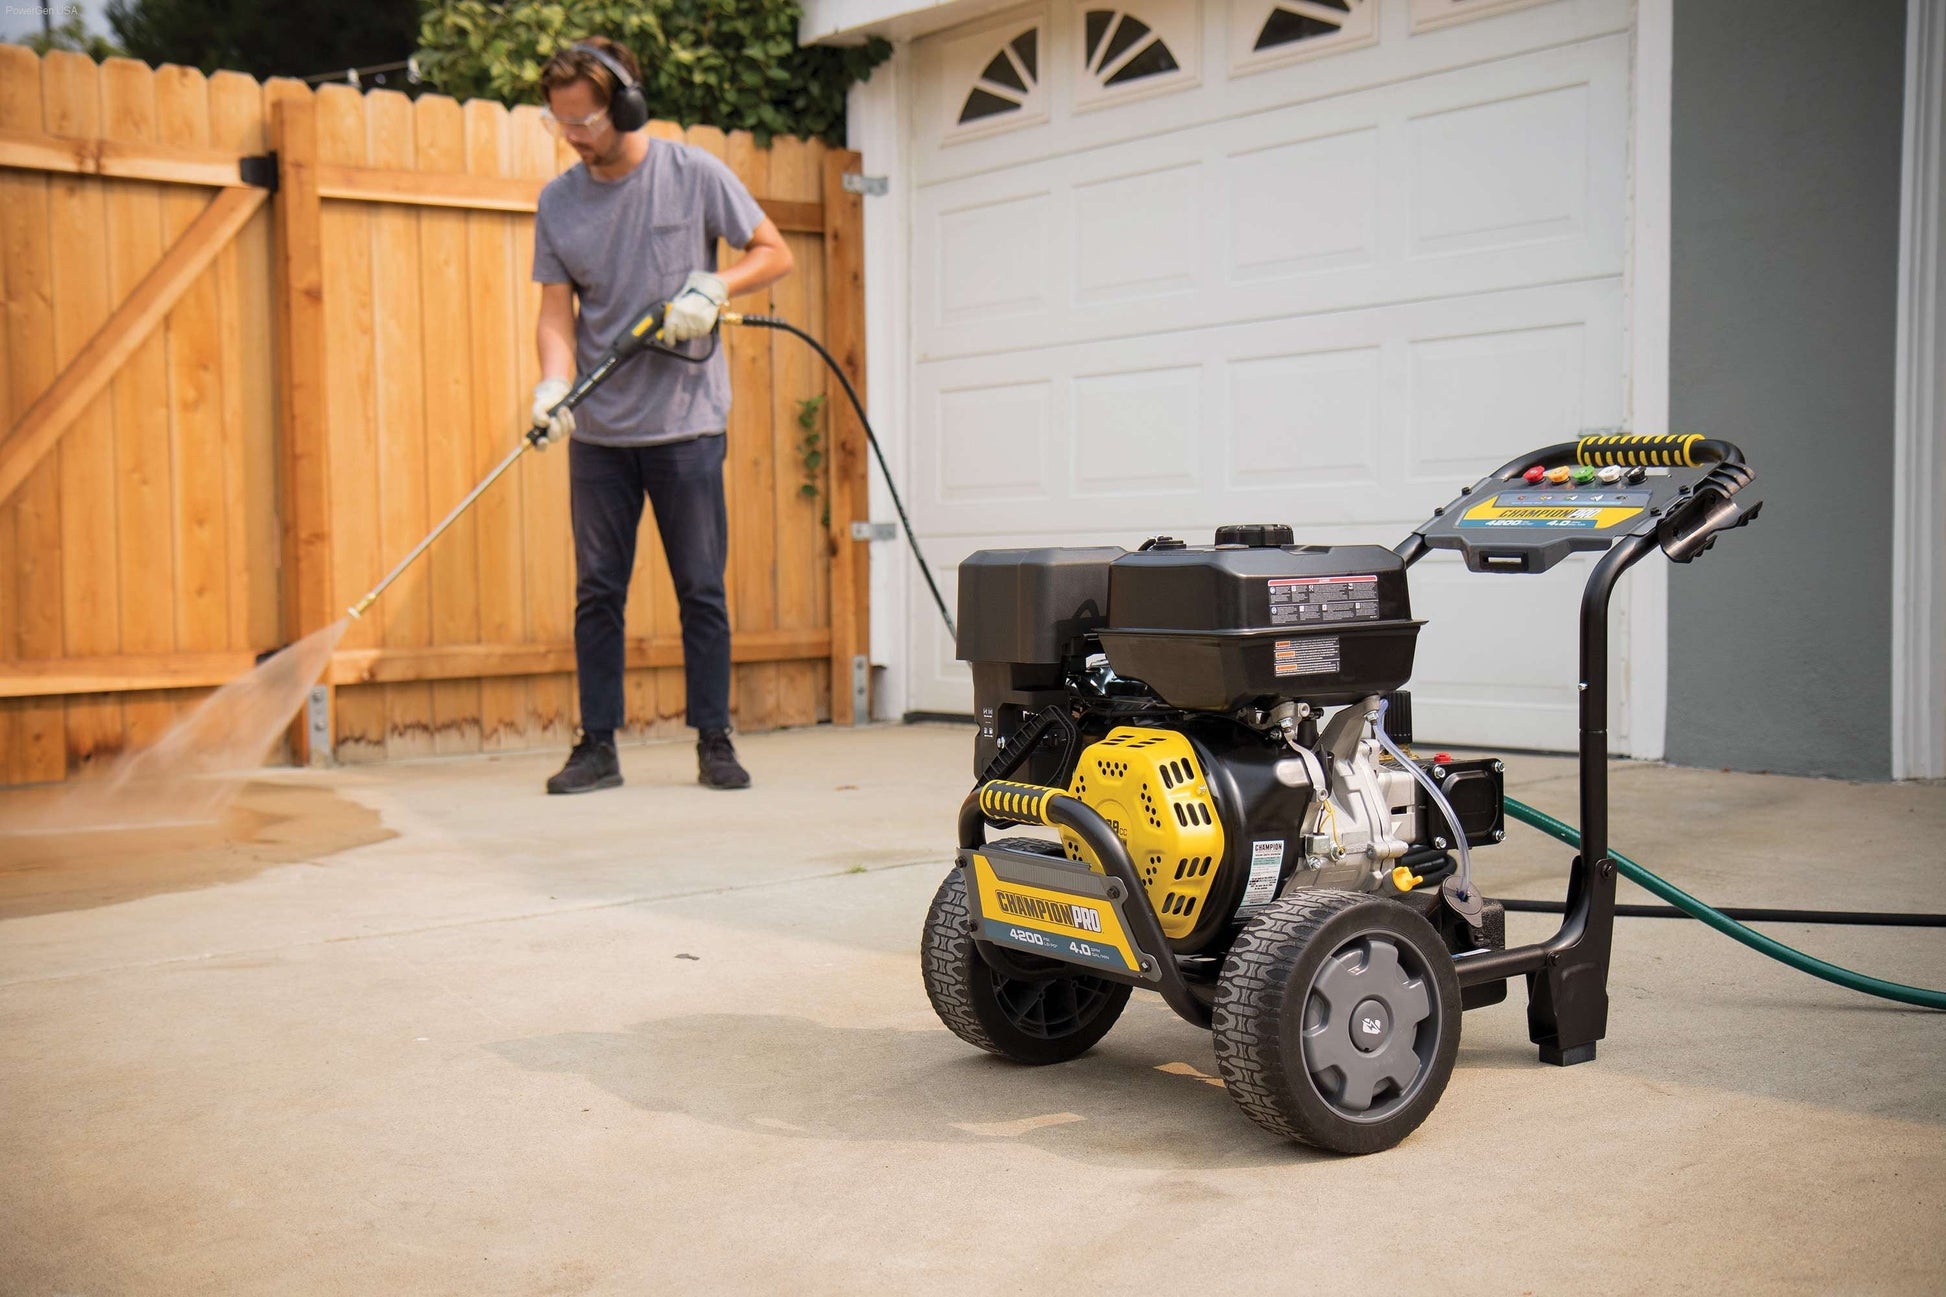 Pressure Washers - ChampionPro 4200-PSI 4.0-GPM Commercial Duty Low Profile Gas Pressure Washer